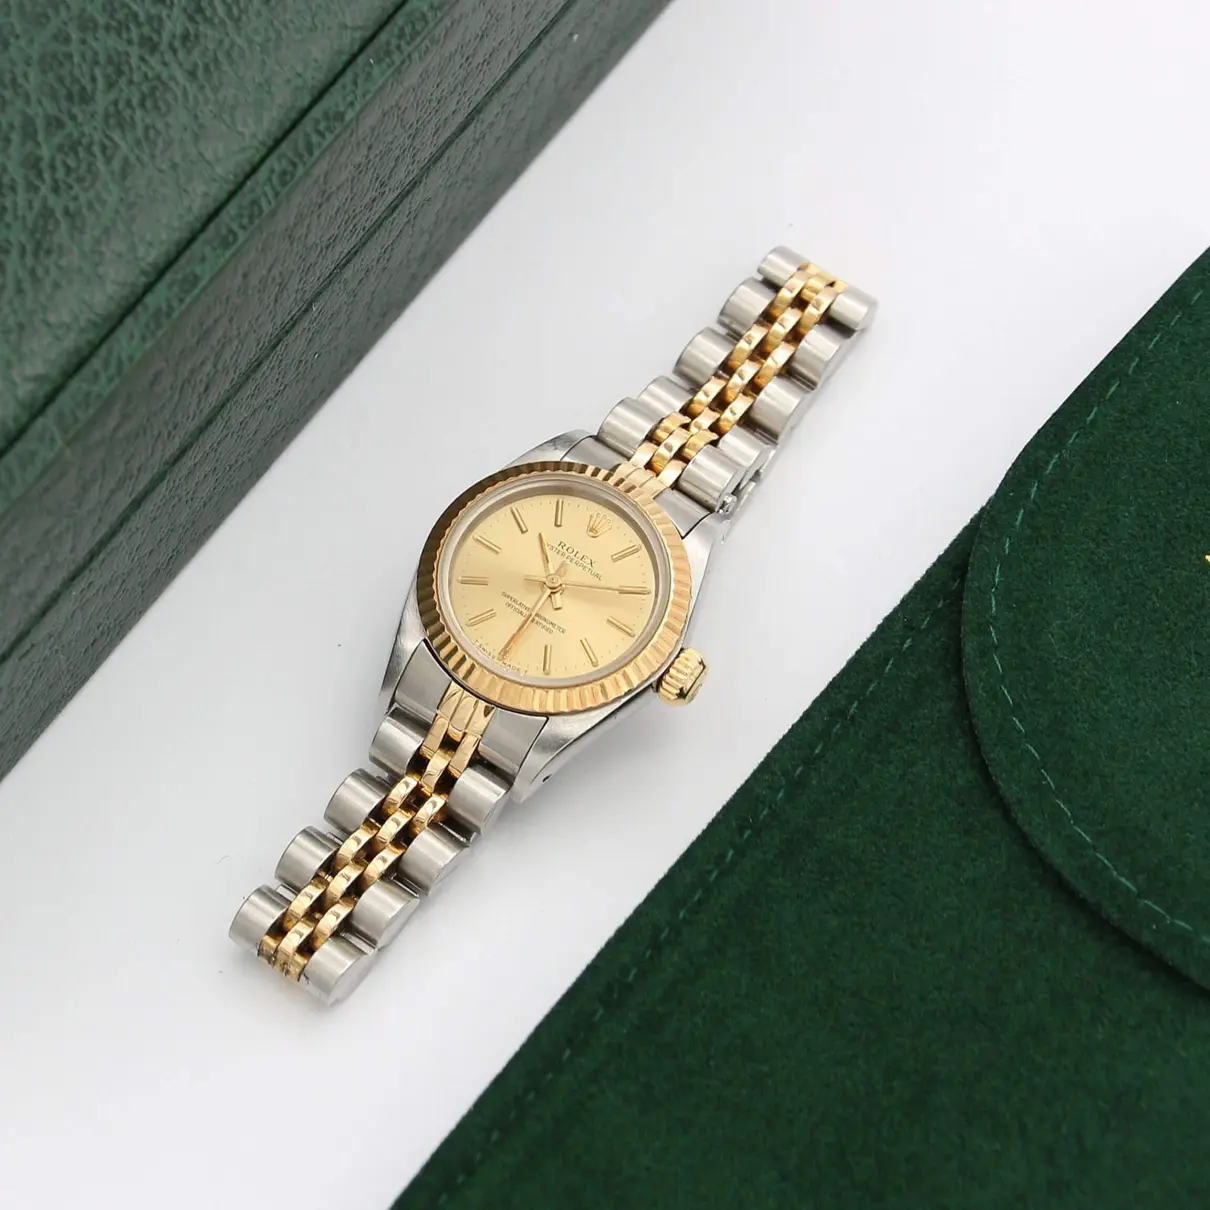 Buy Rolex Lady Oyster Perpetual 26mm watch online - Vintage